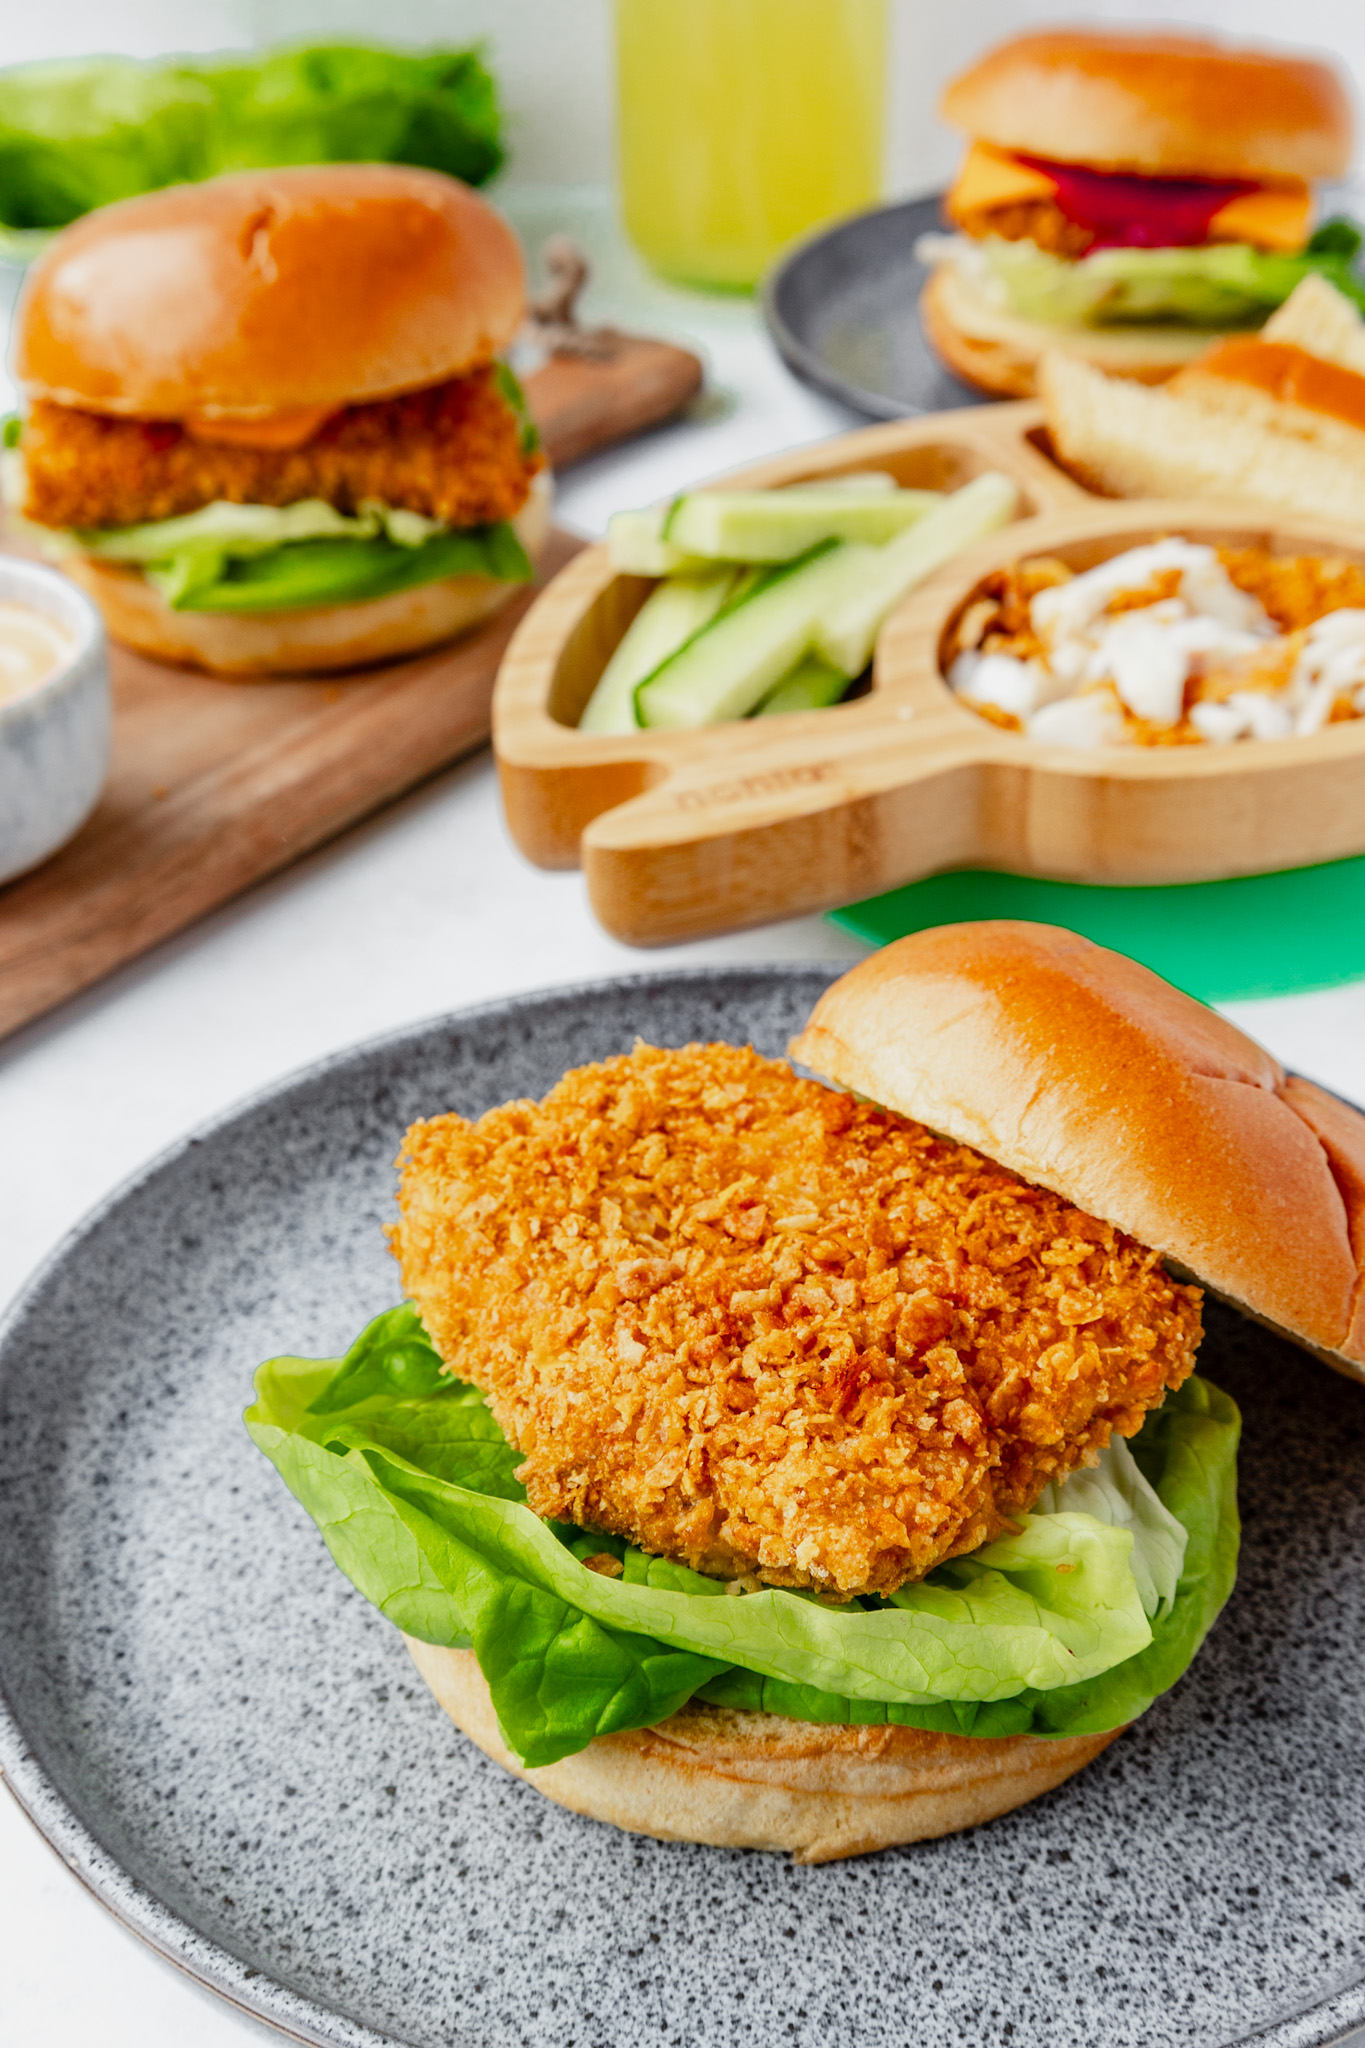 Cod Fillet Burger with Cornflake Crust cook in air fryer or oven bake